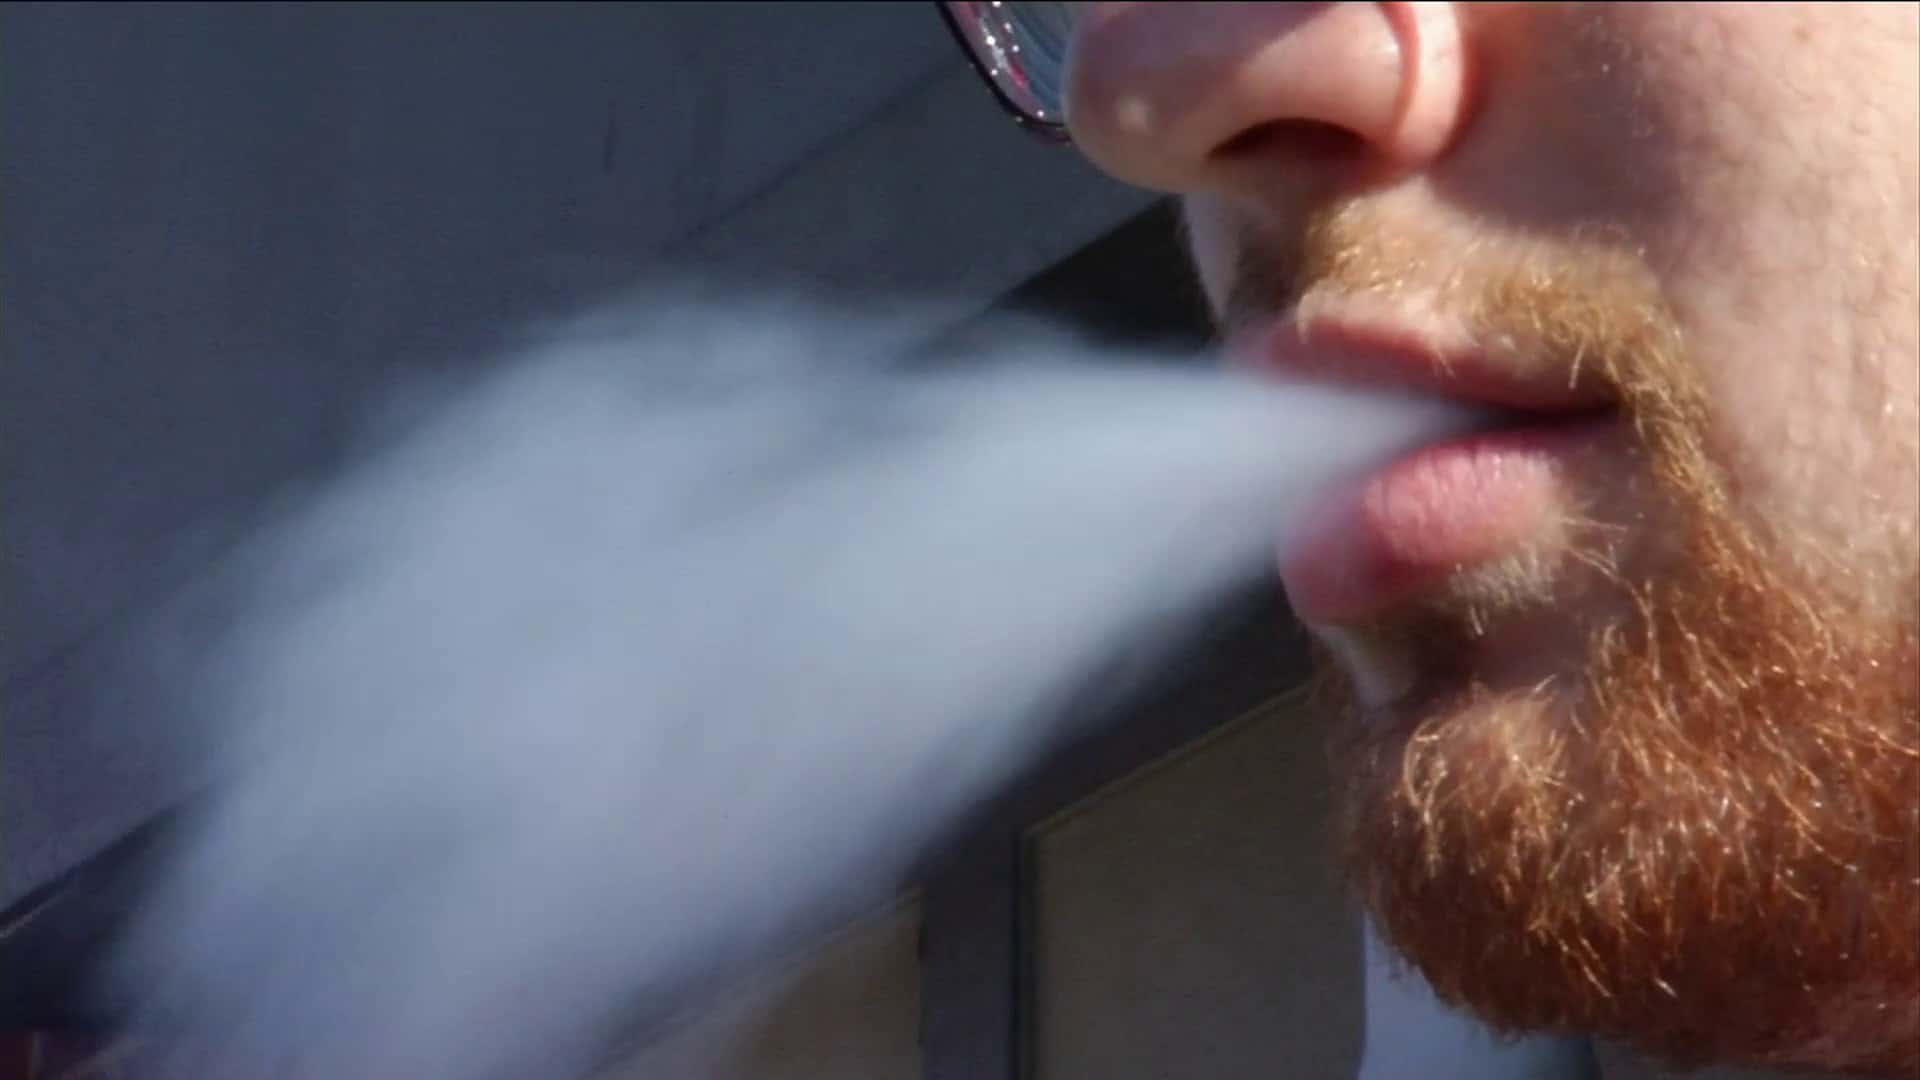 Vaping could cause COVID-19 to be more severe